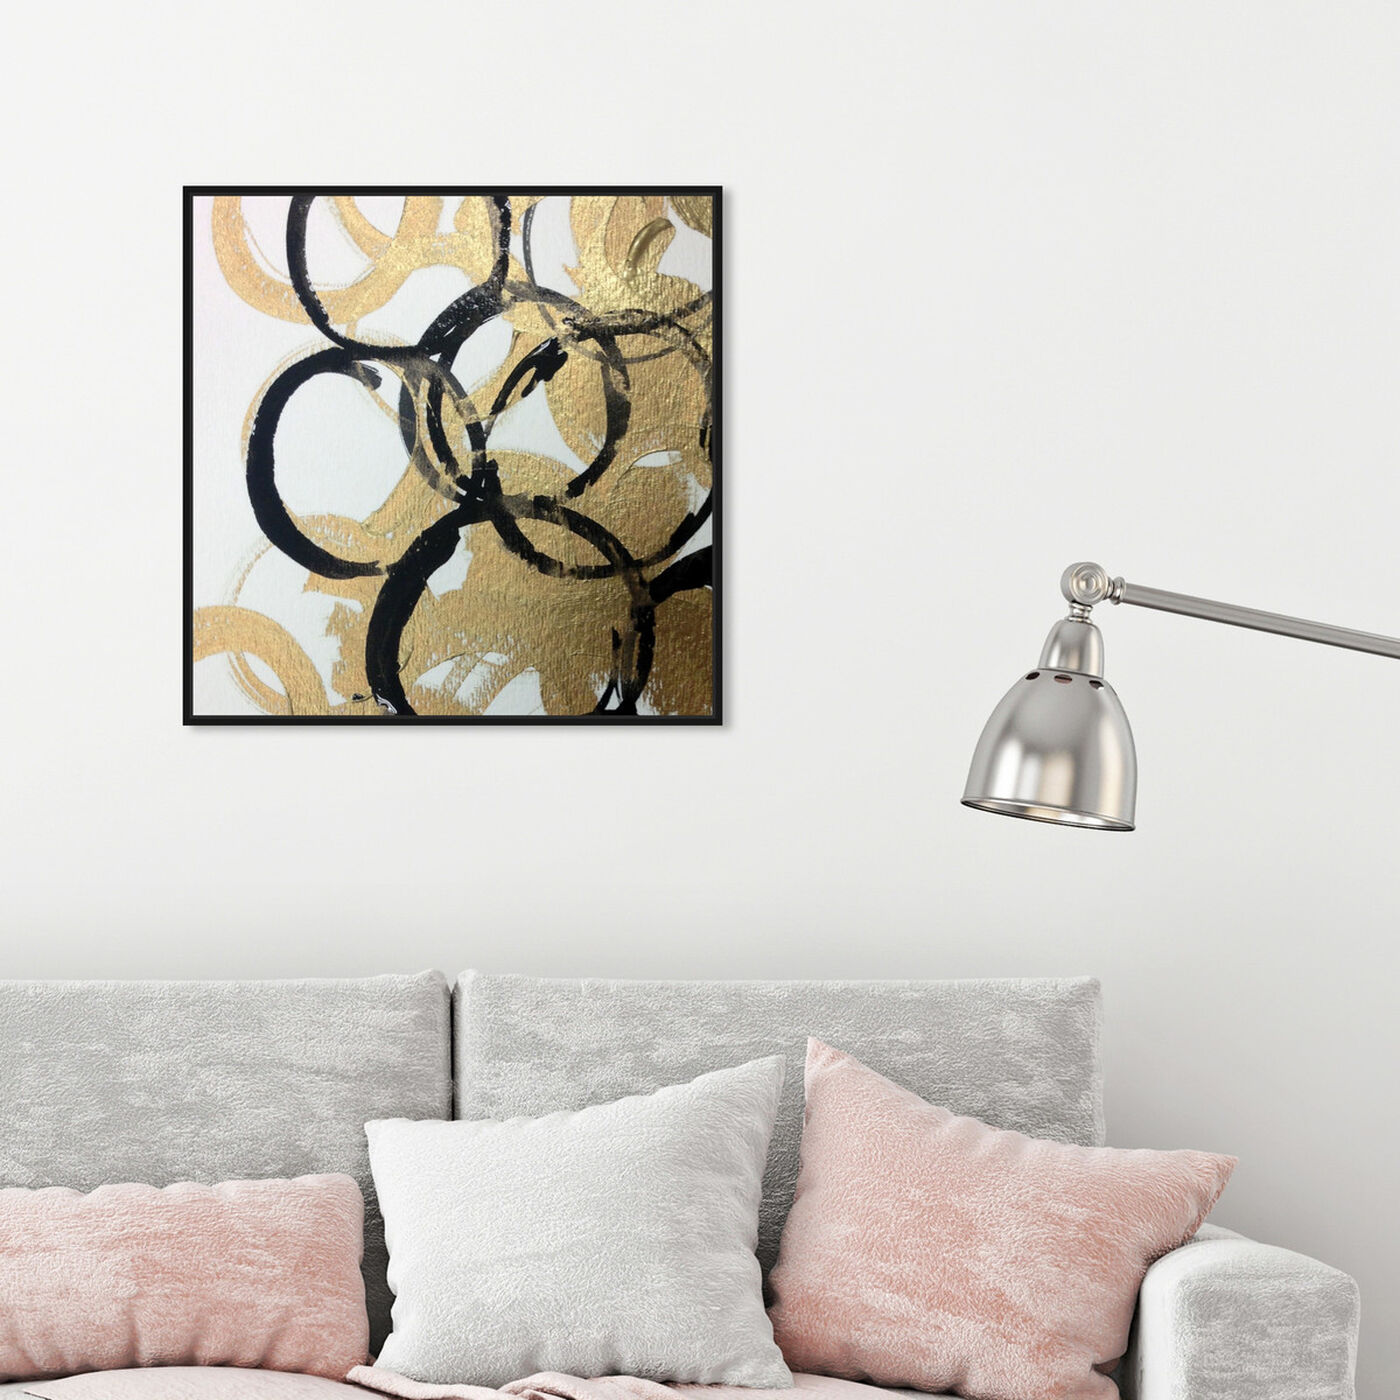 Hanging view of Burana featuring abstract and shapes art.